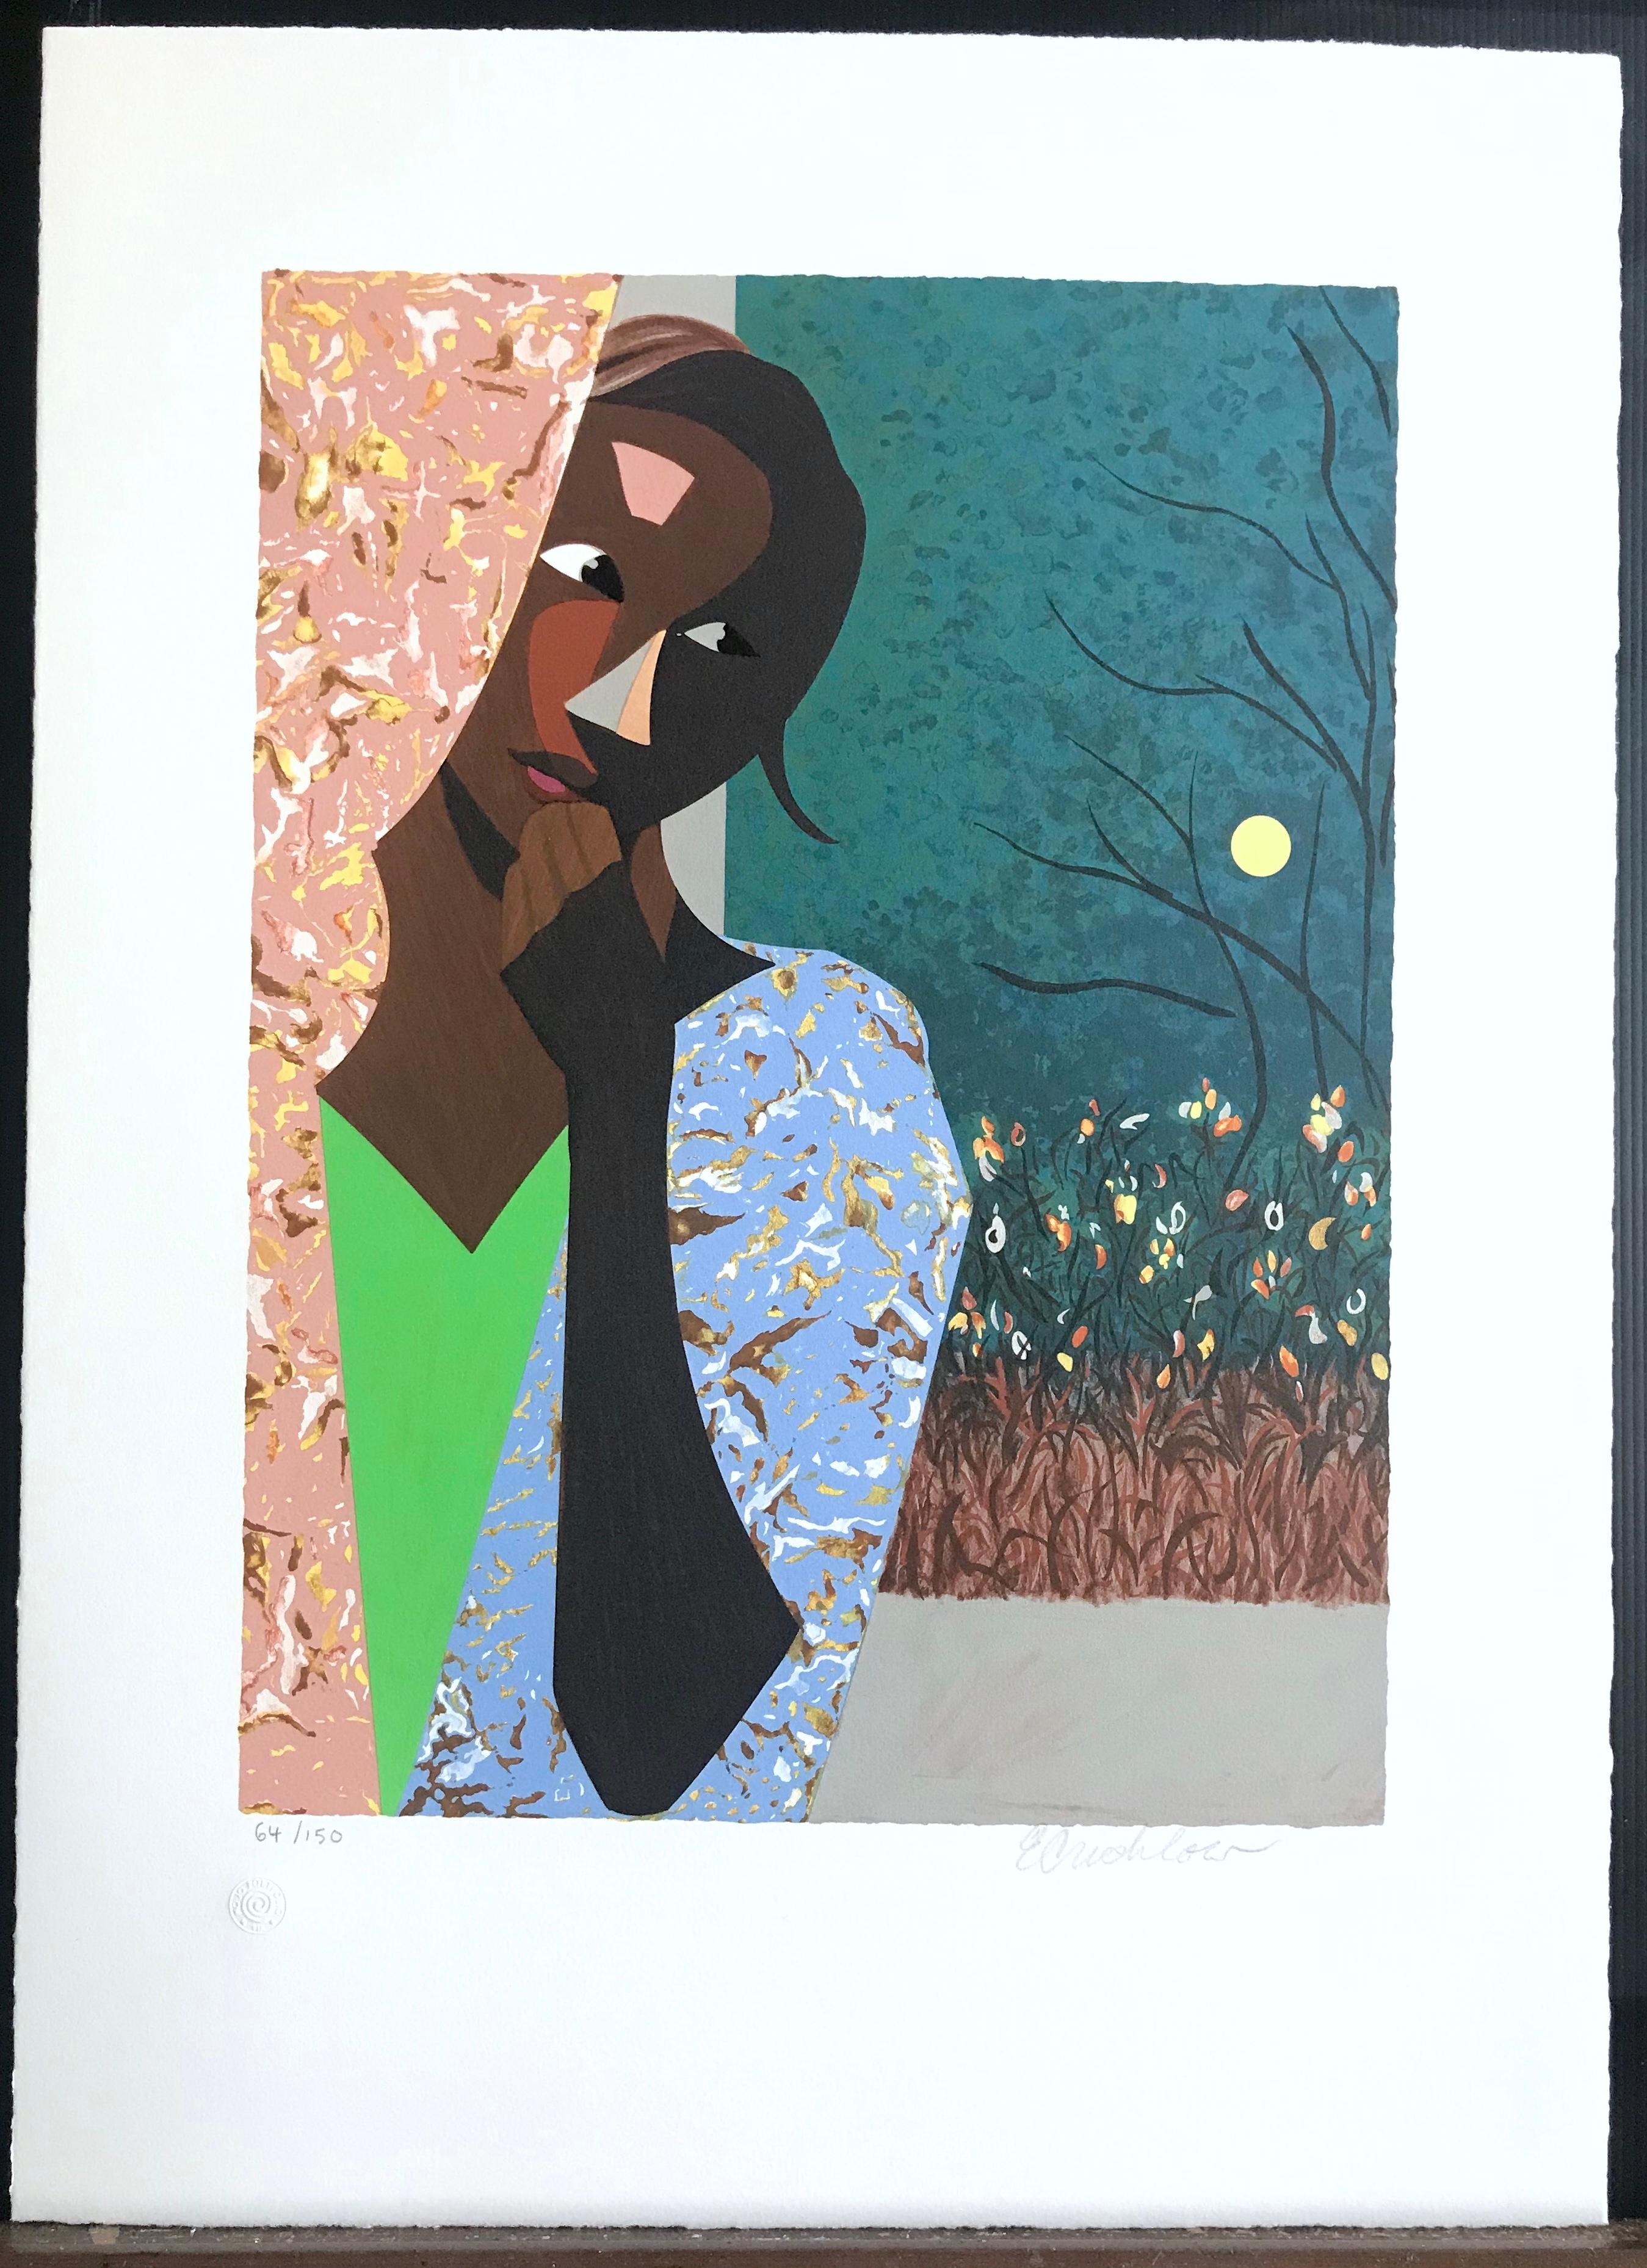 EVENING THOUGHTS is an original limited edition lithograph by the Harlem Renaissance, social realist African-American artist ERNEST CRICHLOW (1914-2005). Printed from hand drawn plates using traditional hand lithography techniques on archival